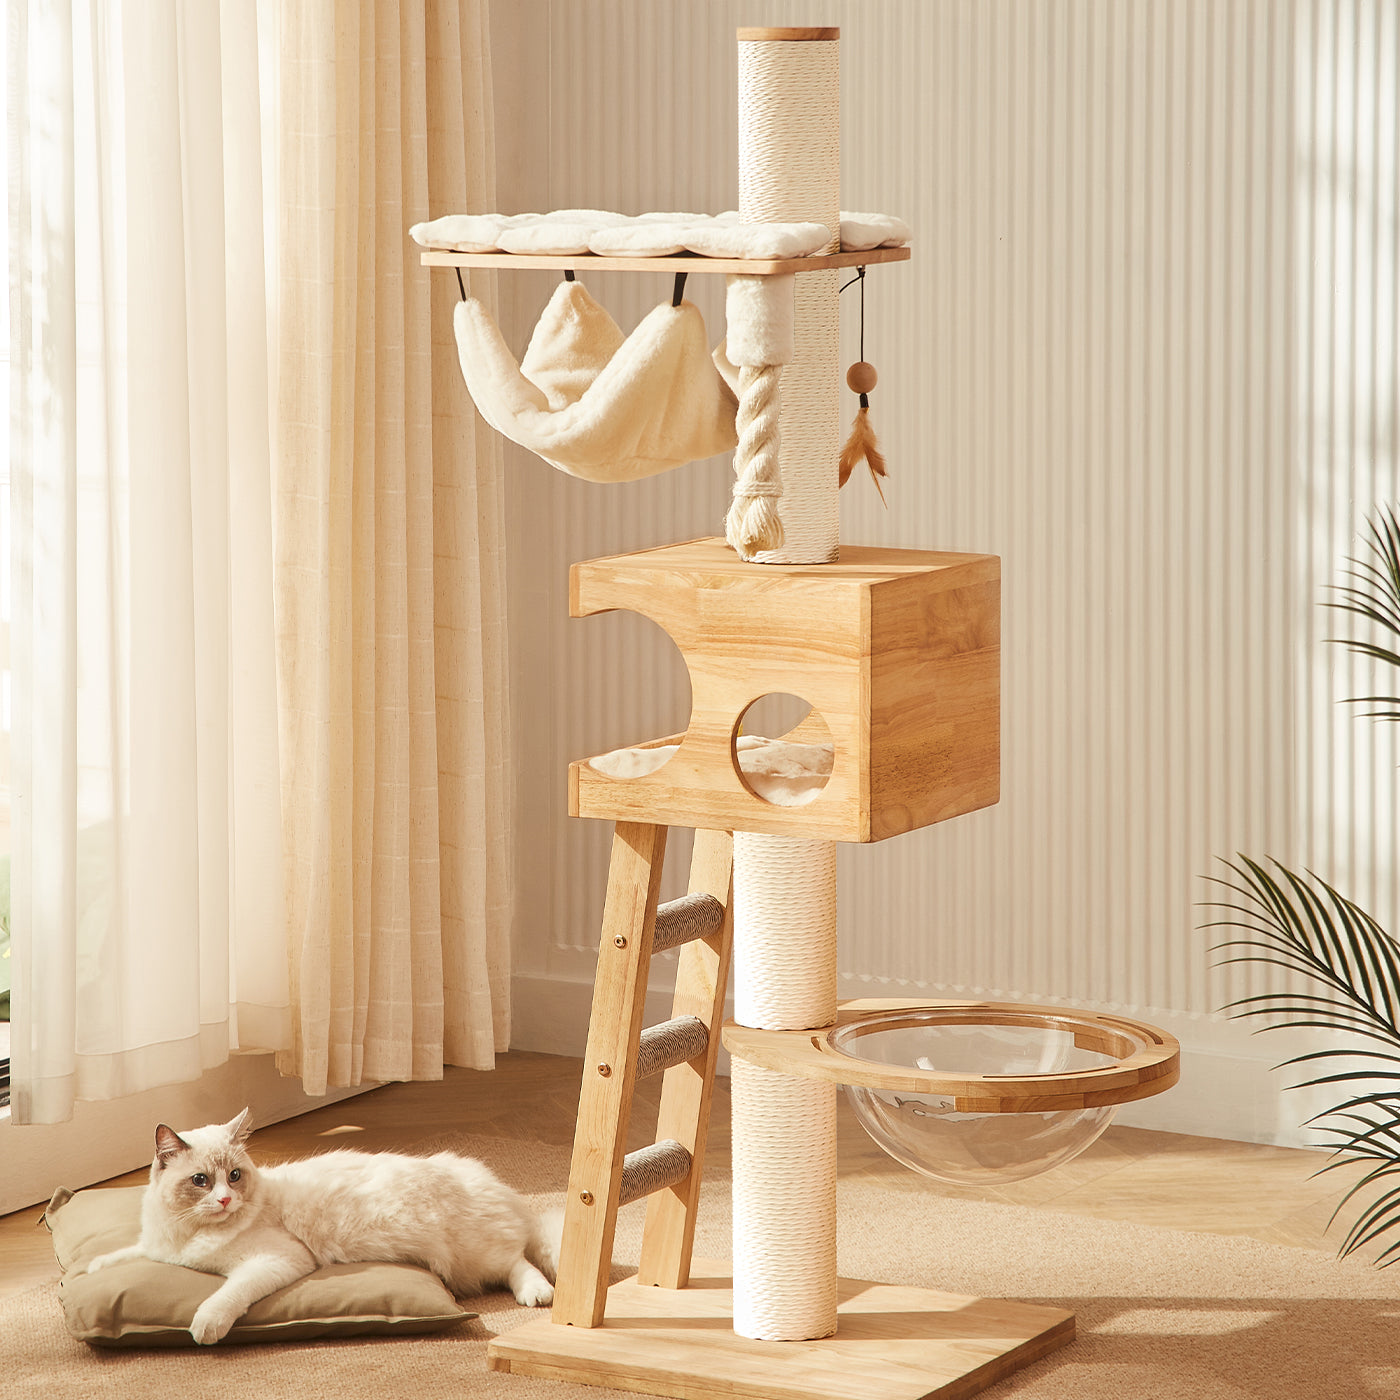 Discover the Ultimate Cat Tree! Helsinki The Levels Cat Play Centre. Present your cat with the perfect cat play centre! Crafted using durable and long-lasting wood, this modern cat play centre features hanging toys to hangout spots, multiple levels for cats to explore, soft, plush hammock to snuggle into and sisal wrapped post for scratching! Available Now at Lords & Labradors  